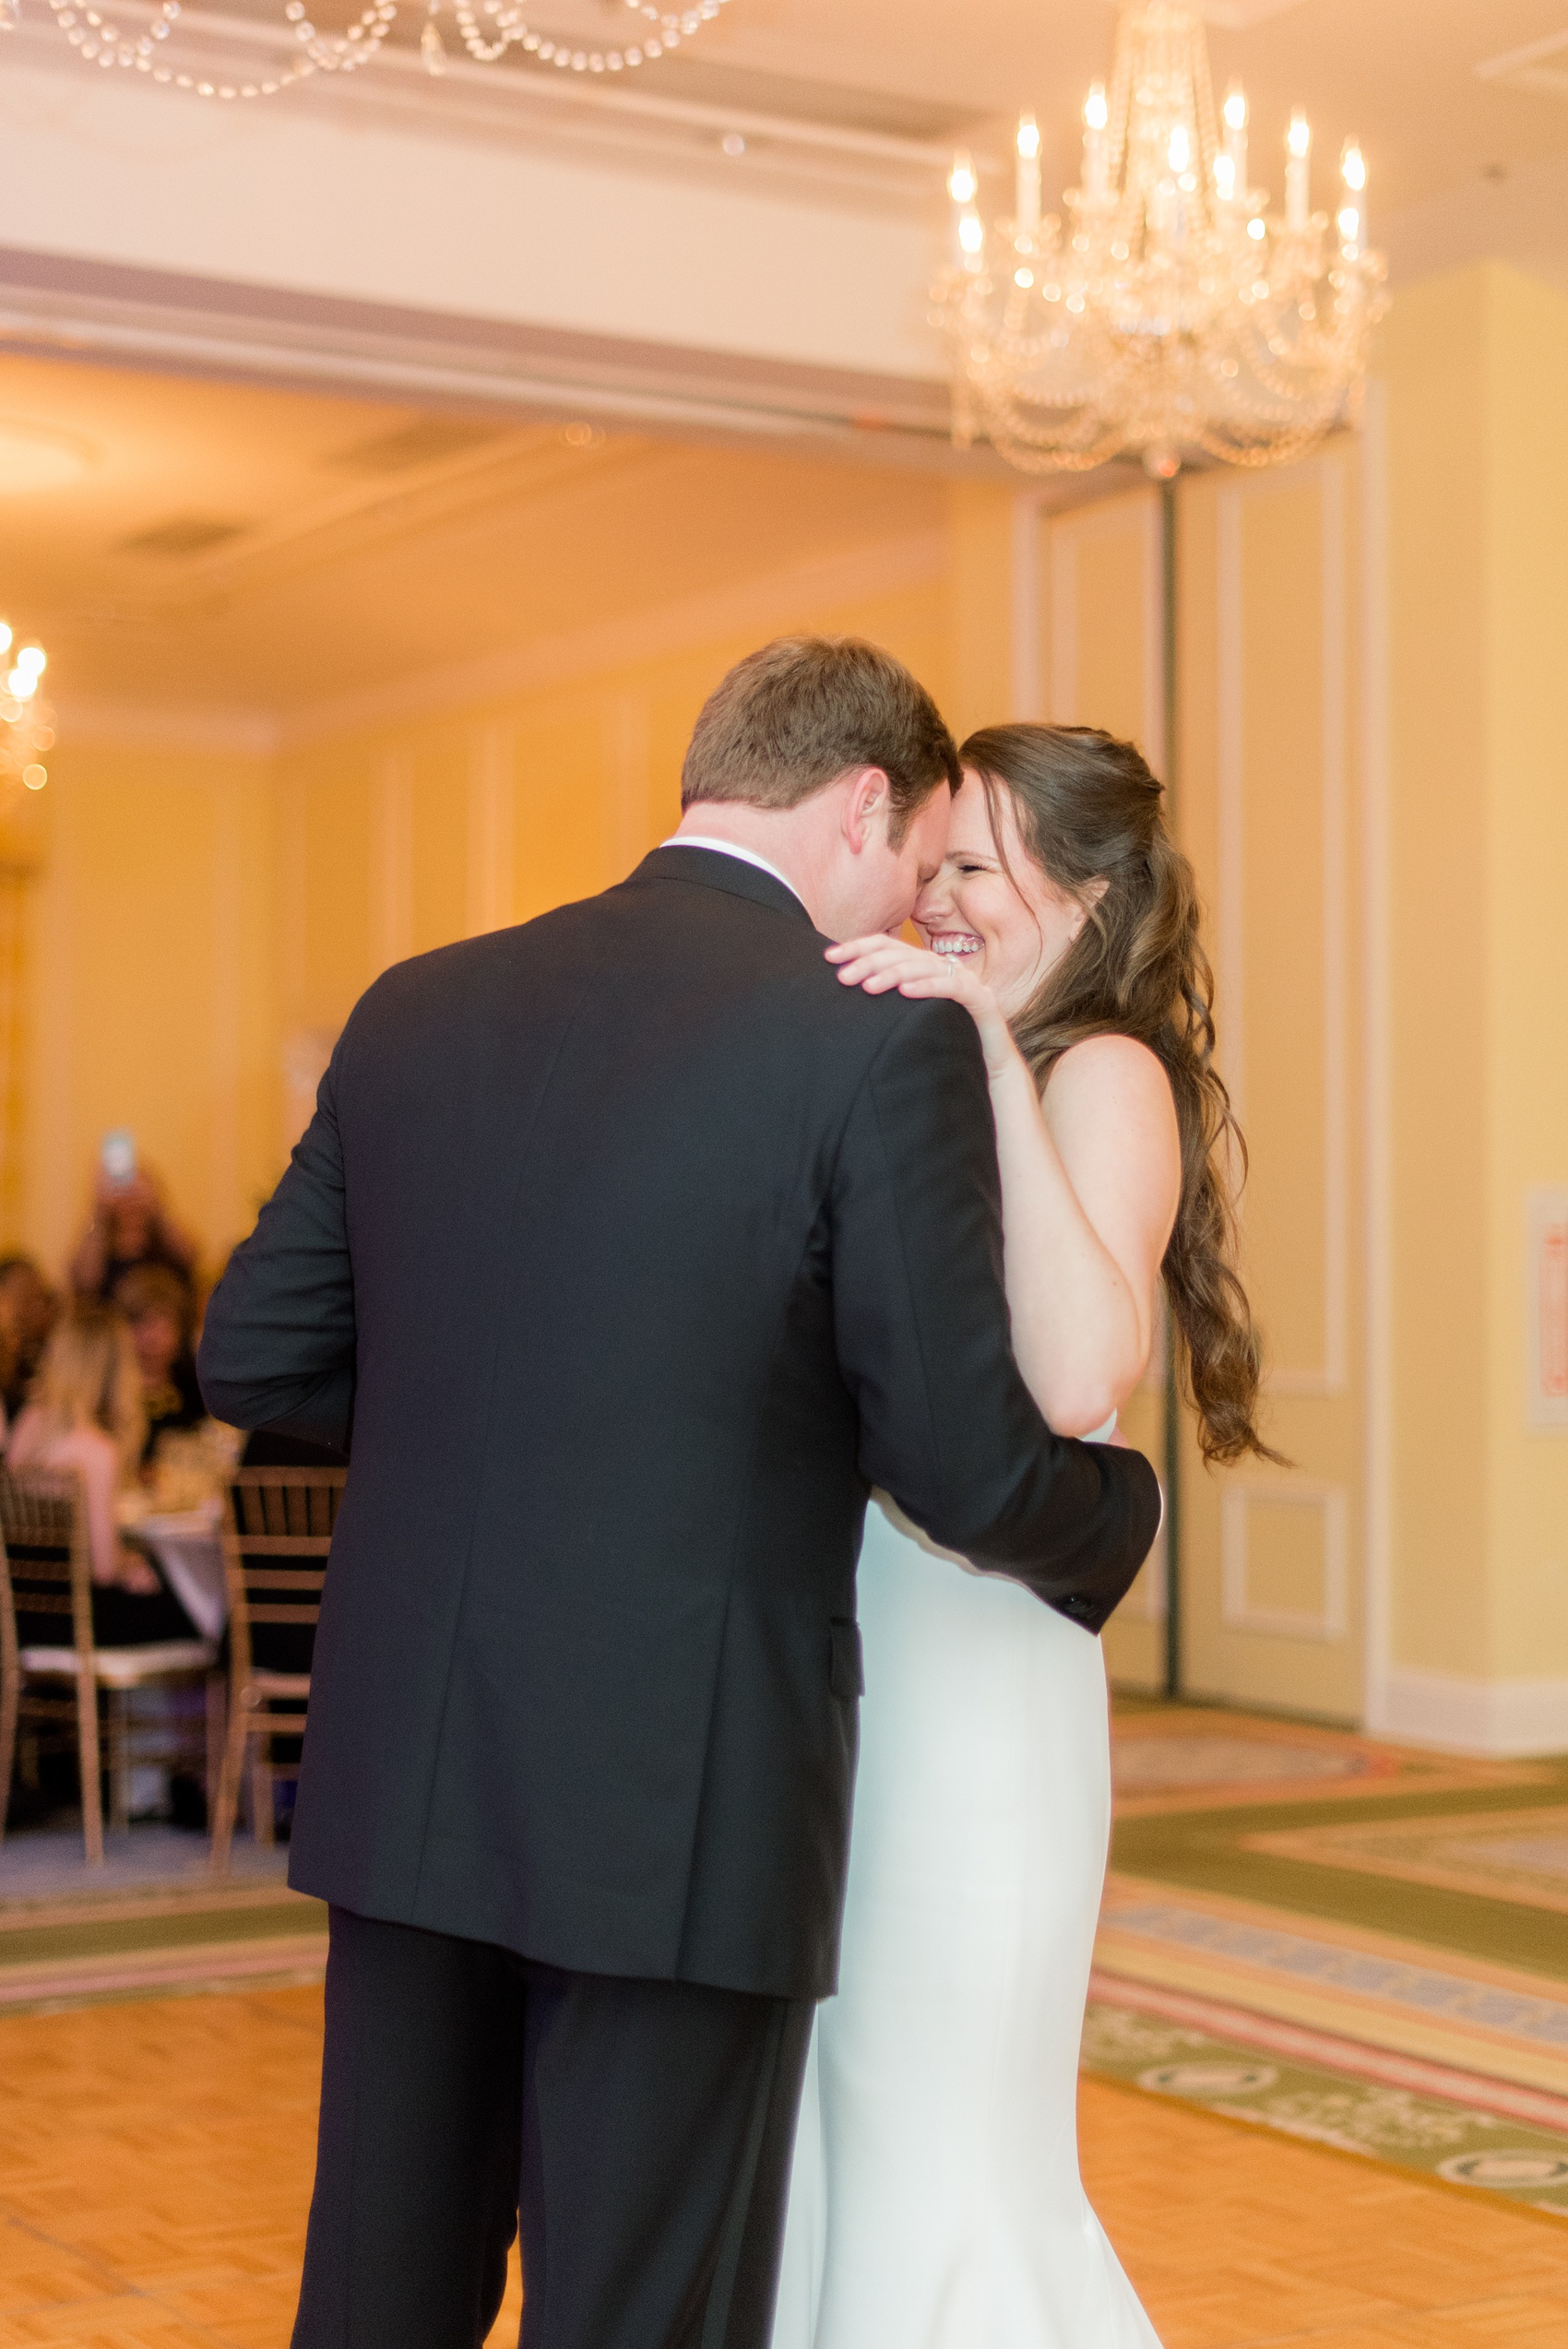 Photos of a fall wedding at The Carolina Inn, in Chapel Hill North Carolina, by Mikkel Paige Photography. This event venue doubles as a hotel for guests, with a for an indoor reception space. The bride and groom danced their first dance, listened to toasts and speeches and cut their cake in a beautiful ballroom. Click through to see all of this wedding inspiration! Planning by @asouthernsoiree #thecarolinainn #ChapelHillWeddings #MikkelPaige #indoorreception #ballroom